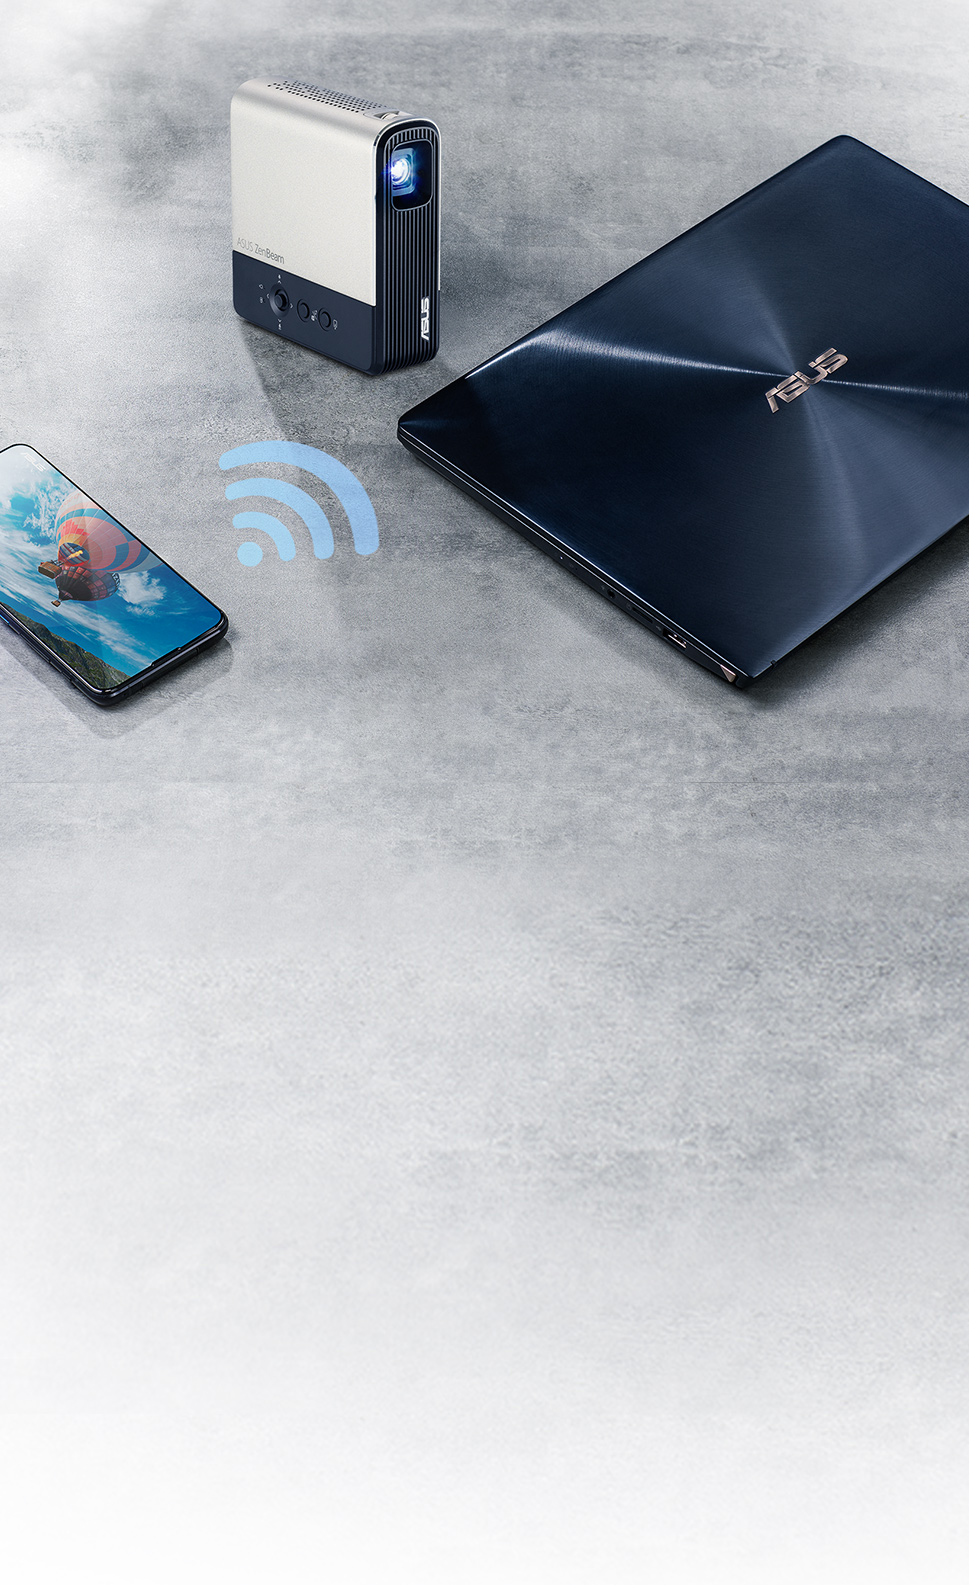 ZenBeam E2 supports wireless mirroring from Android, iOS and Windows 10 or above devices or wired HDMI connection